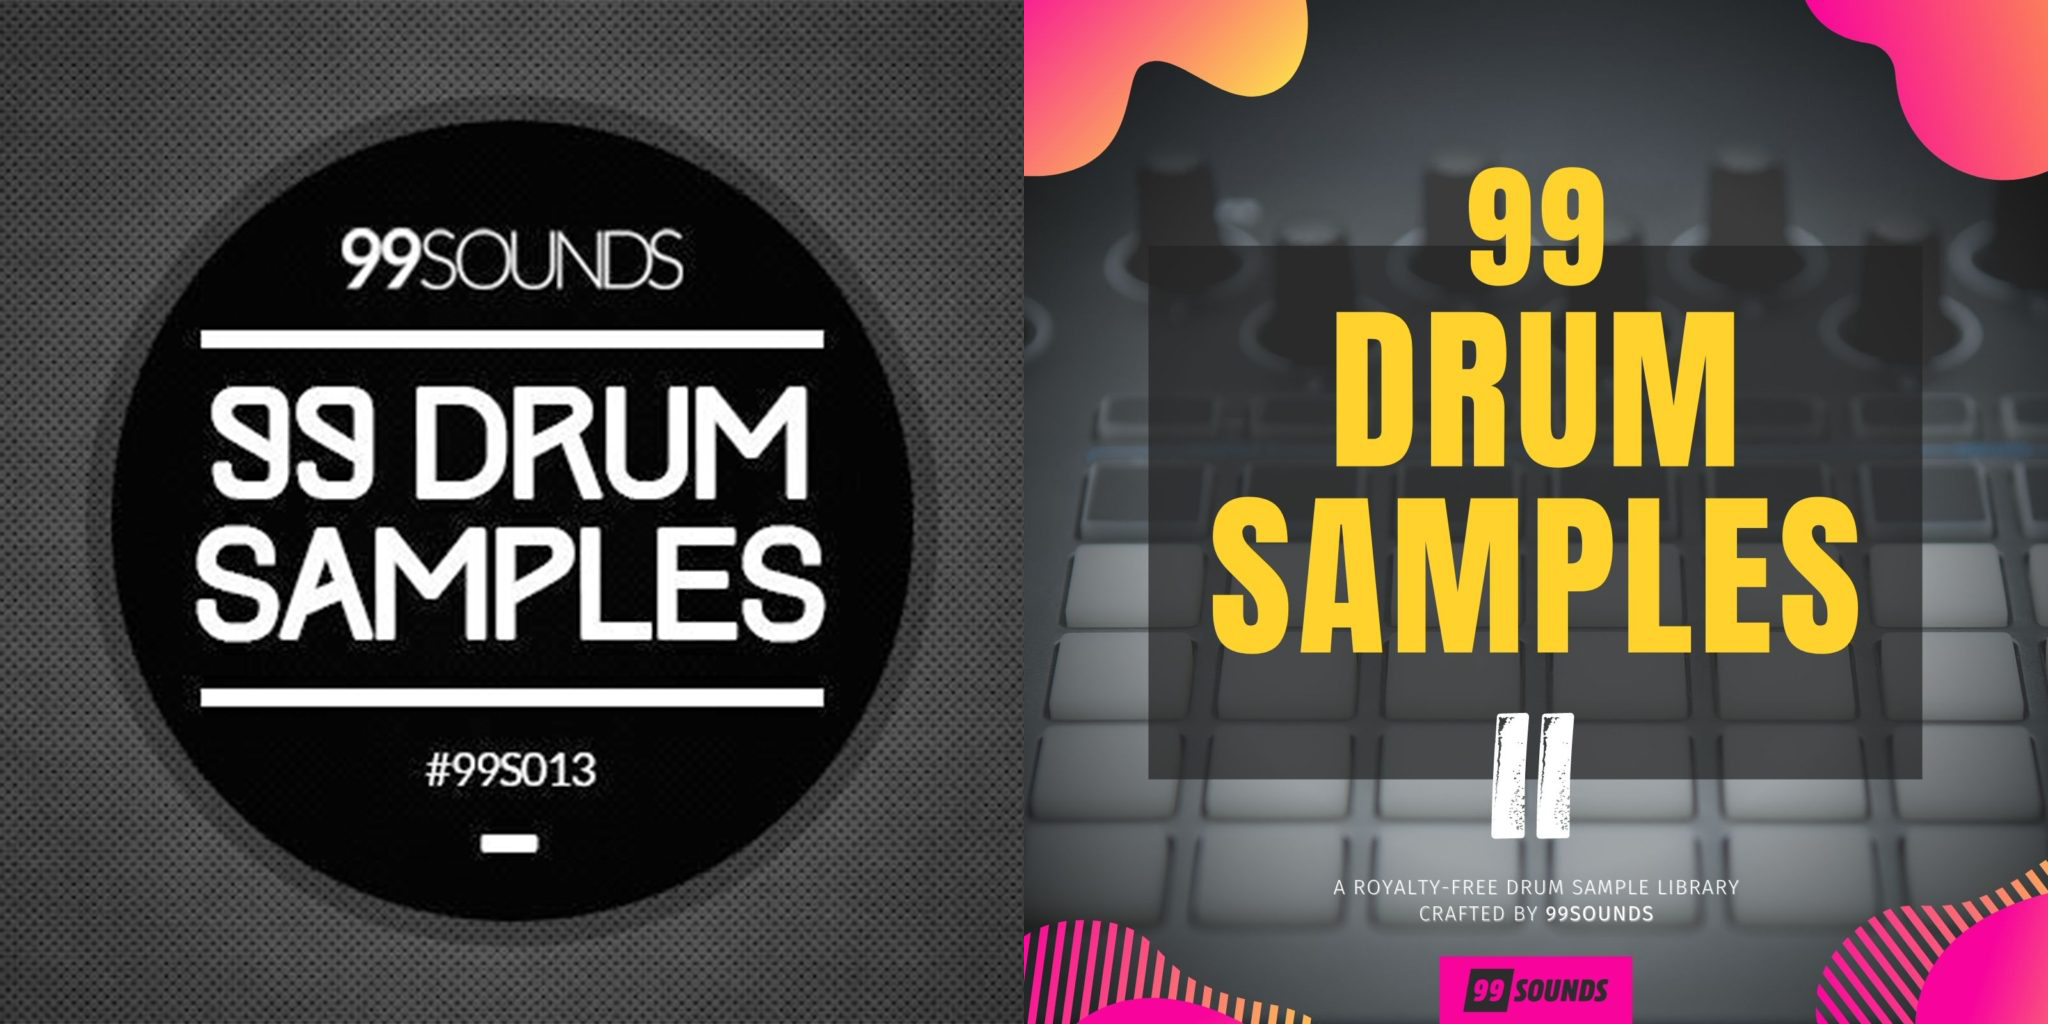 99 Drum Samples I and II are currently free from 99Sounds